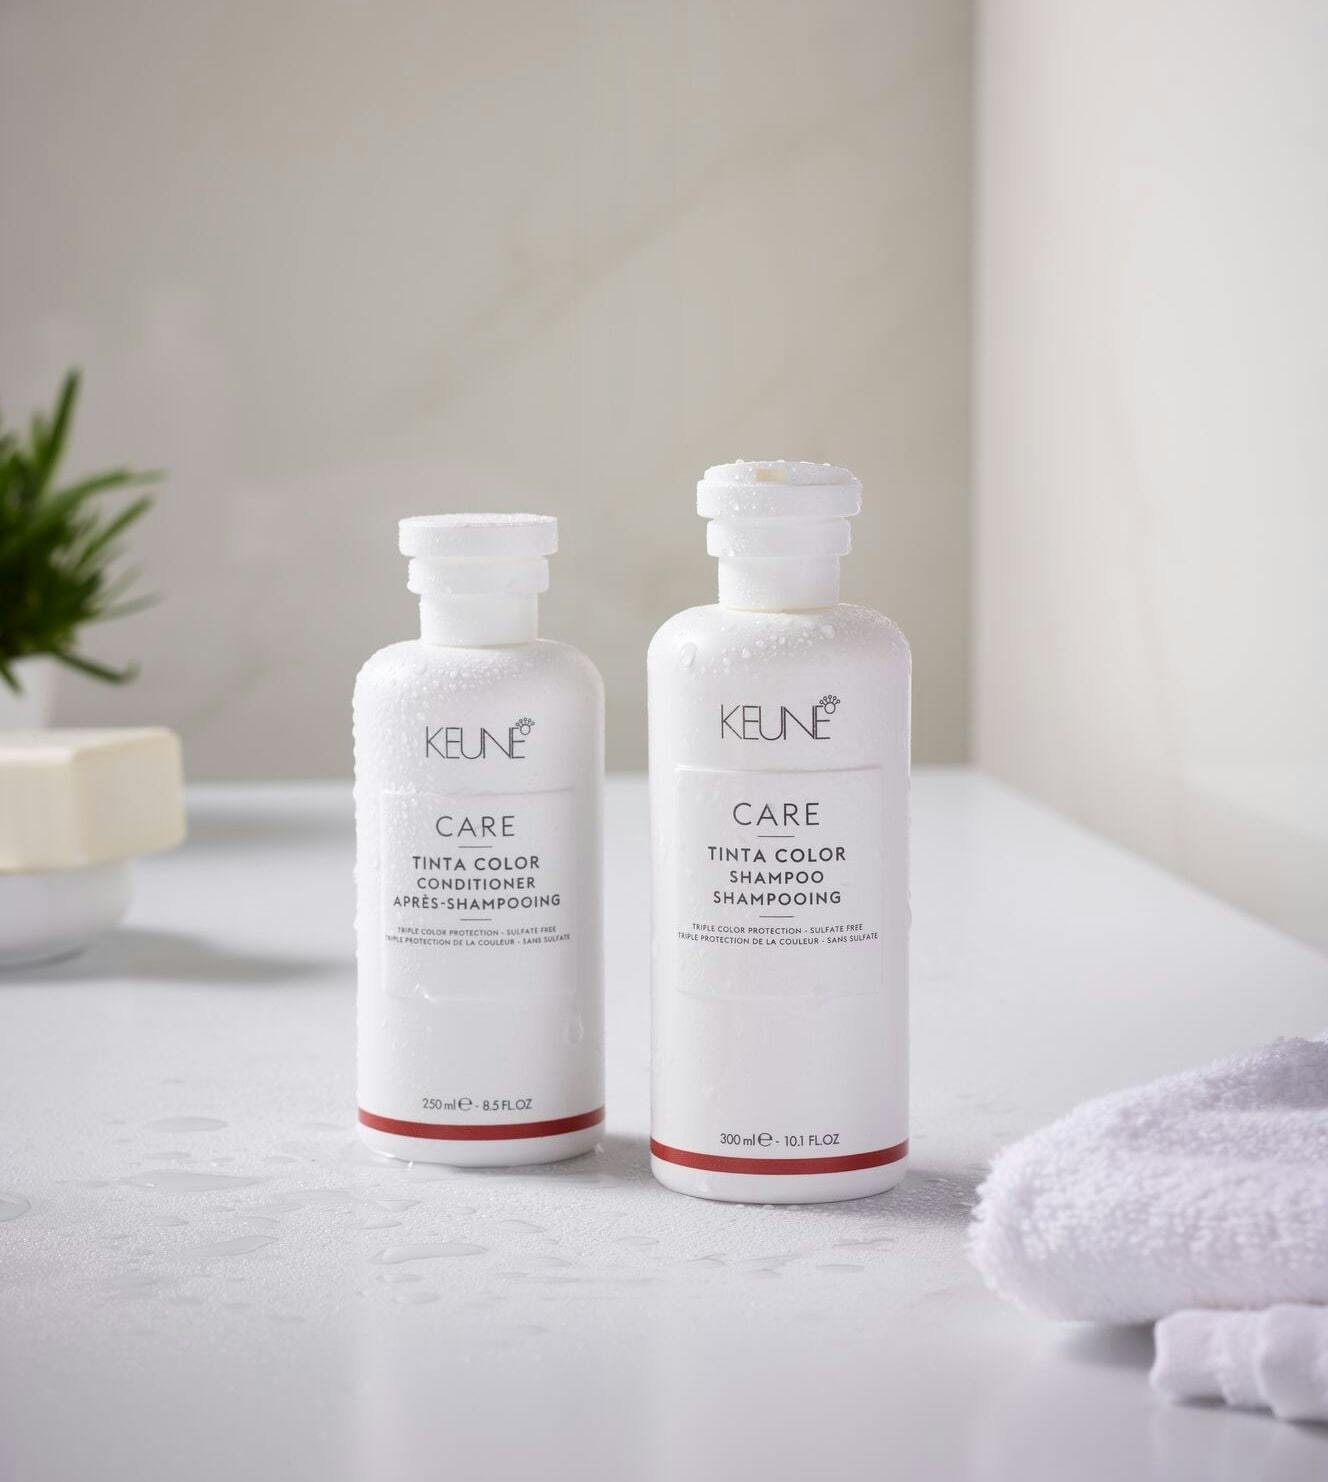 Image of bottles Keune Care Tinta Color Shampoo and Conditioner